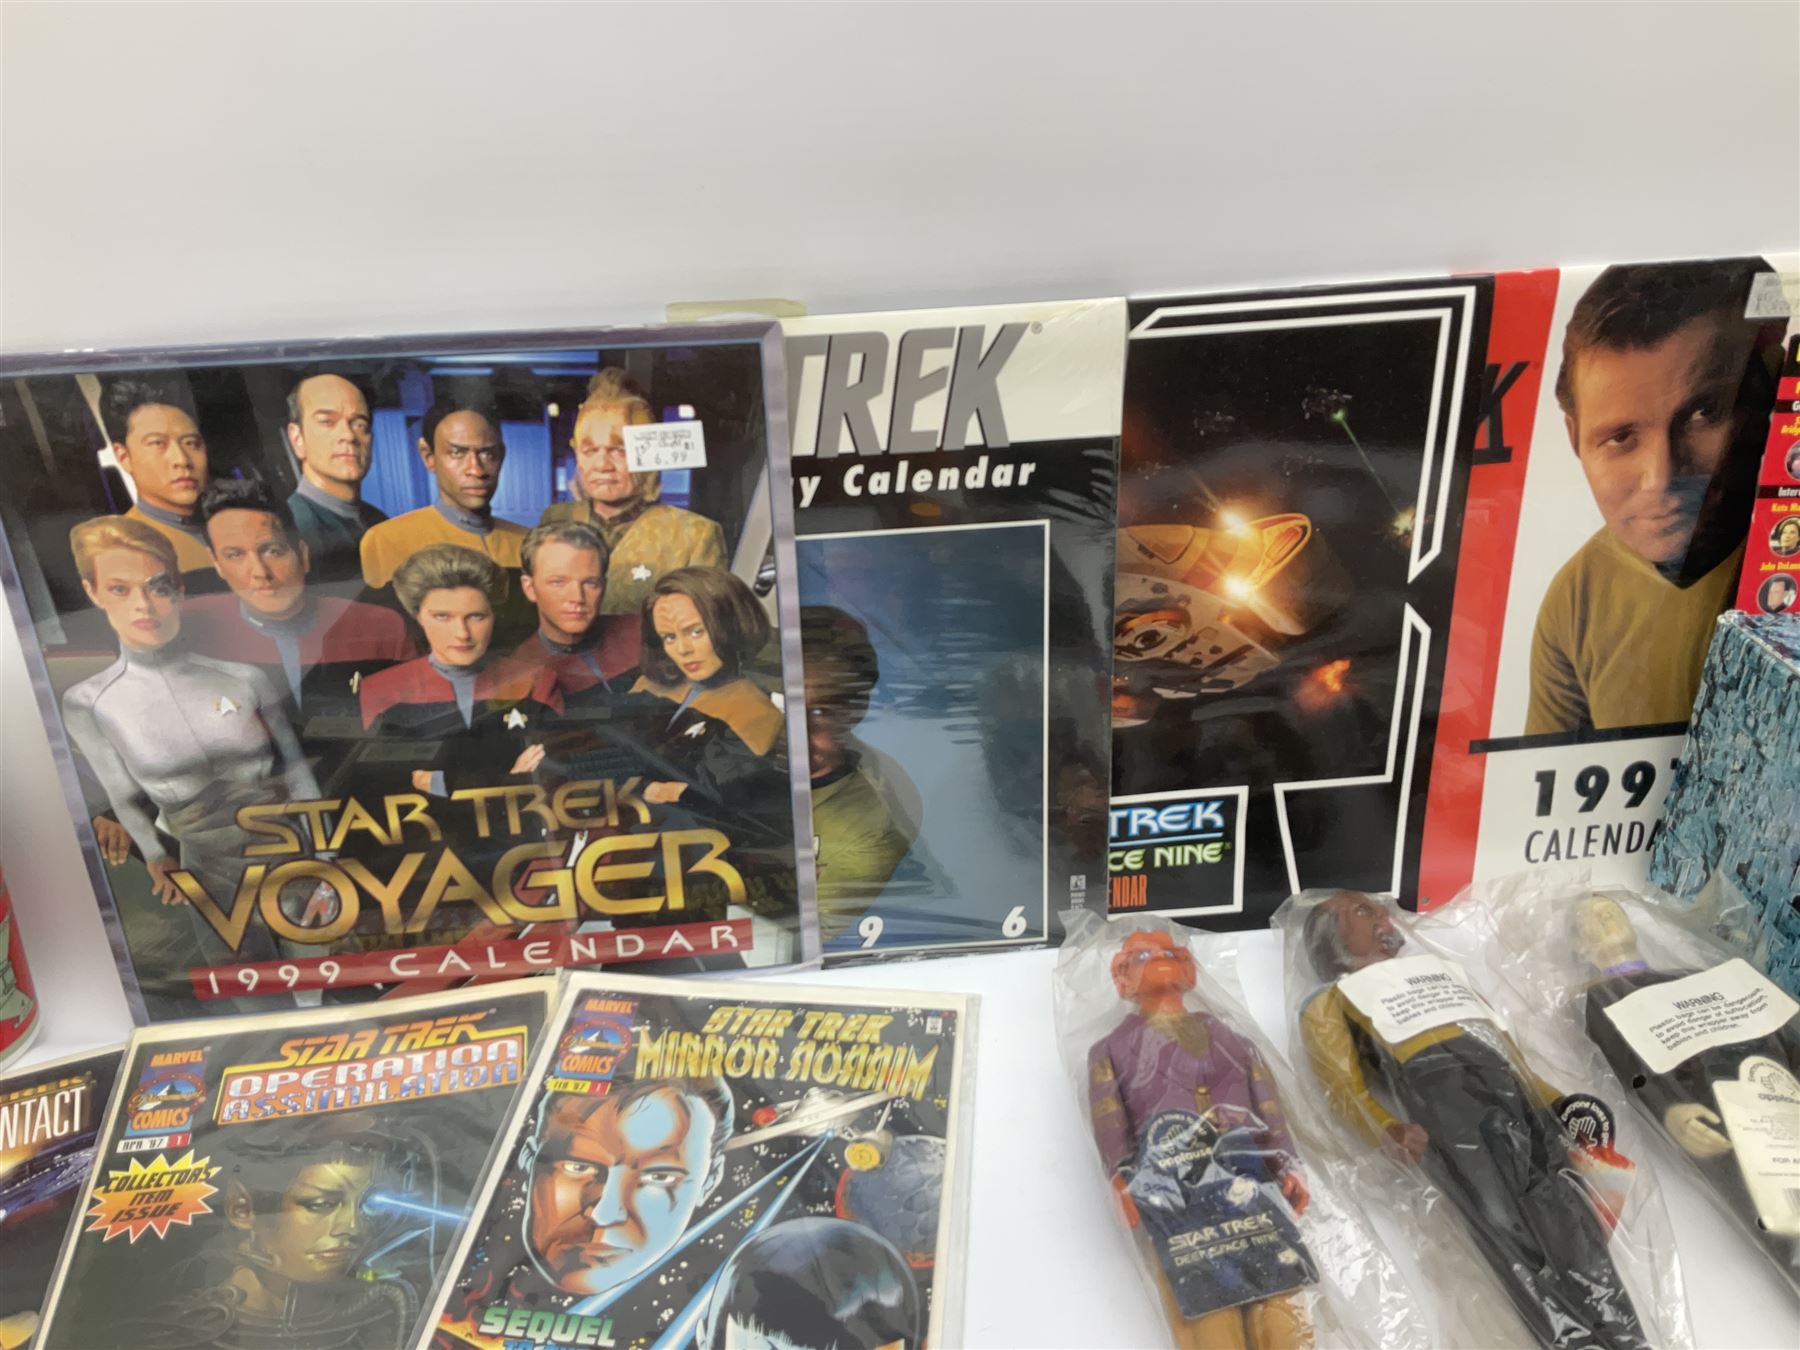 Quantity of Star Trek memorabilia and promotional merchandise including action figures - Image 6 of 7